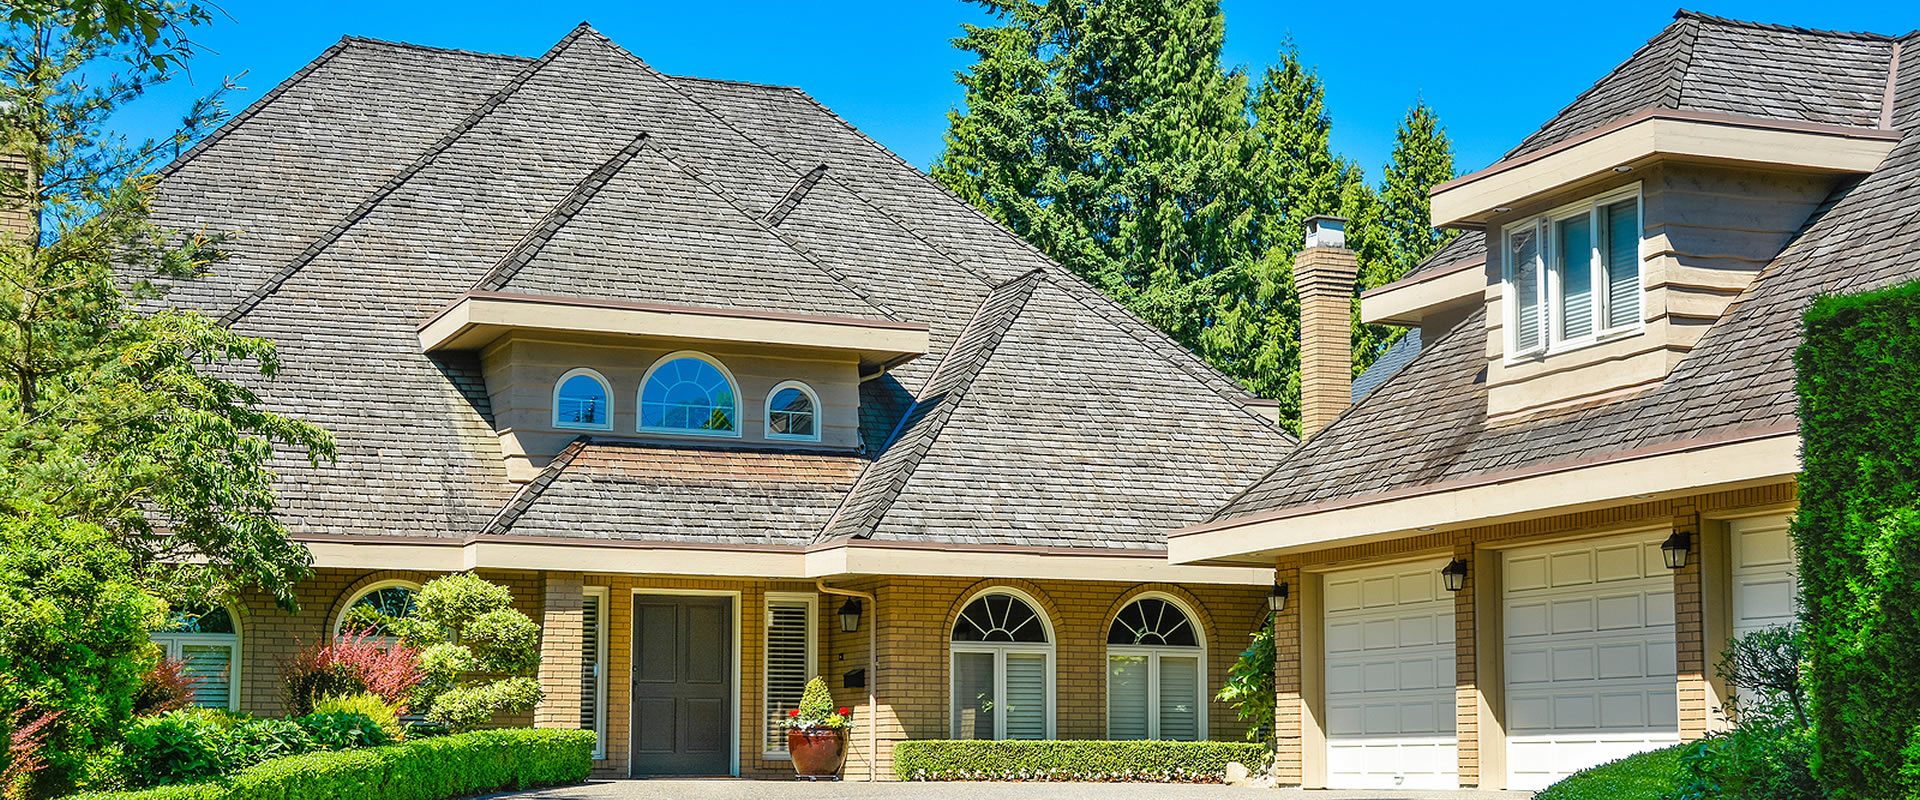 Why is a Steep Roof More Expensive?